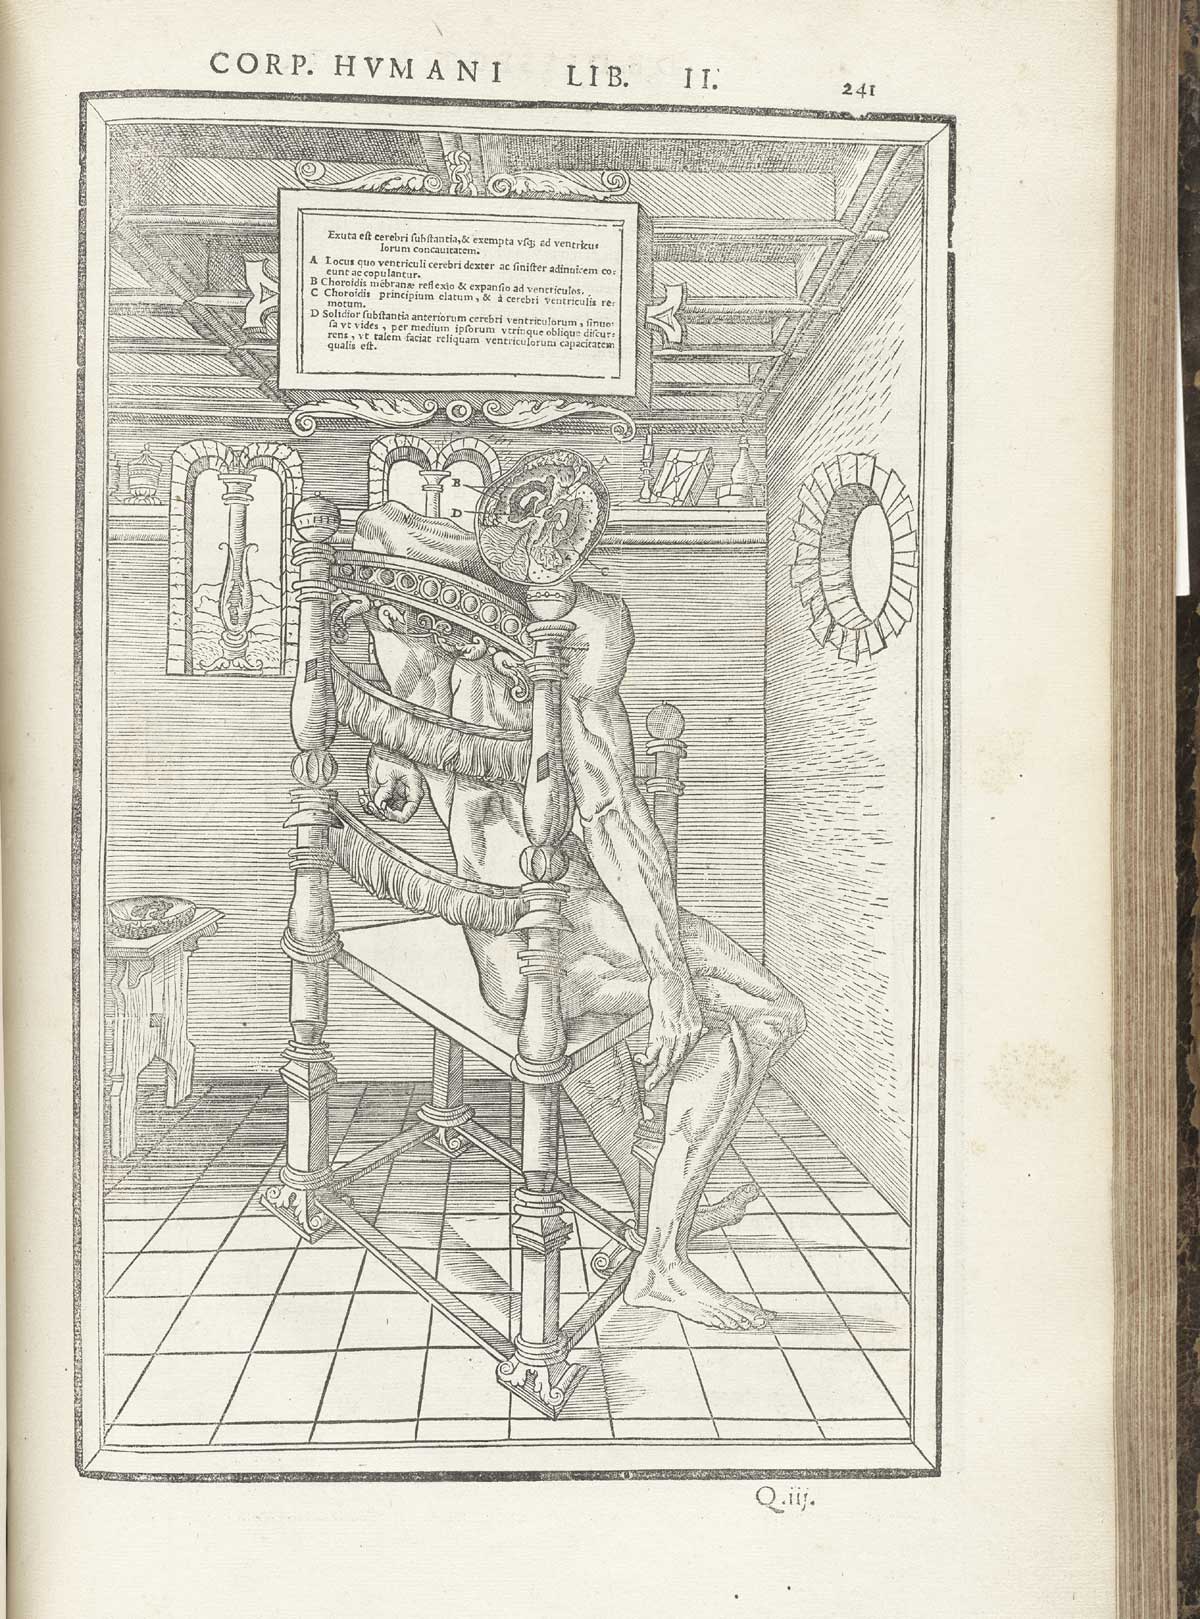 Woodcut of a nude male figure seated in a chair facing away from the viewer in a room with a round window to the right, a rectangular window to the left, and a small bookshelf above, with the cadaver giving a view of the top of his head with the top of the skull and half of the brain removed to show interior of the cerebral cortex, while above is a tablet naming the structures in Latin; from Charles Estienne’s De dissection partium corporis humani libri tres, NLM Call no.: WZ 240 E81dd 1545.